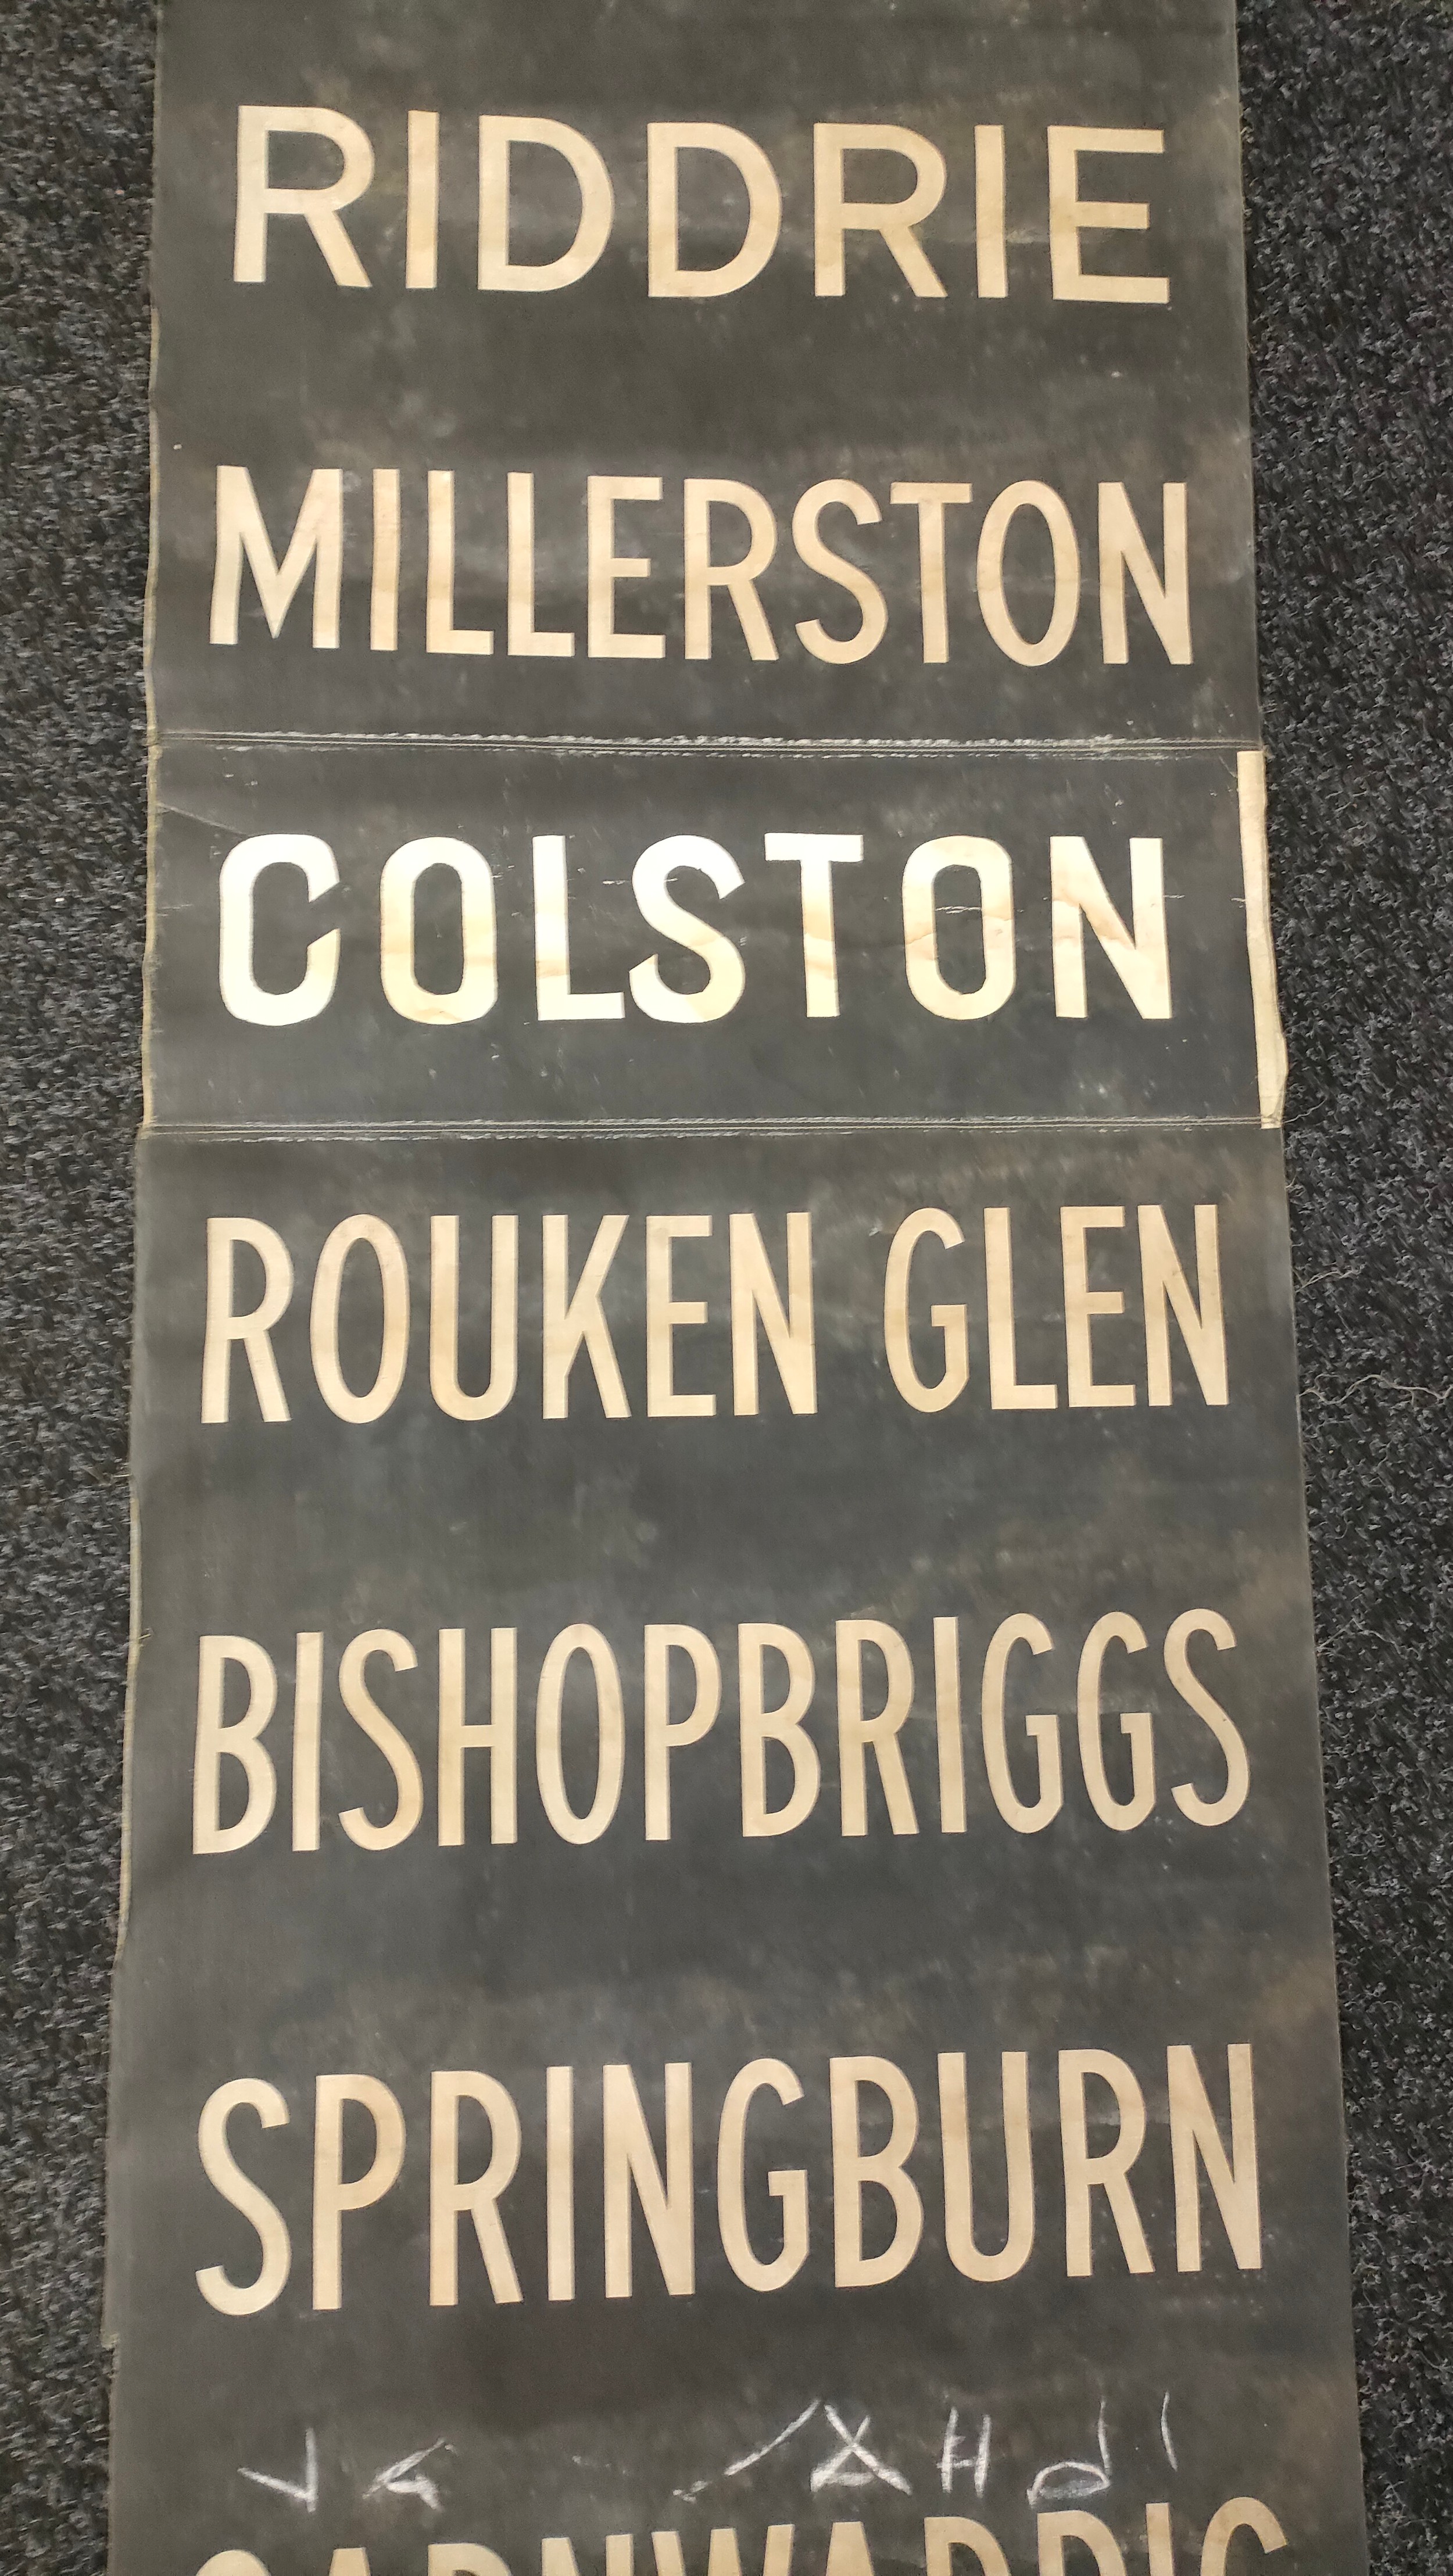 Antique Glasgow Bus advertising street name banner [1340x65] - Image 2 of 7